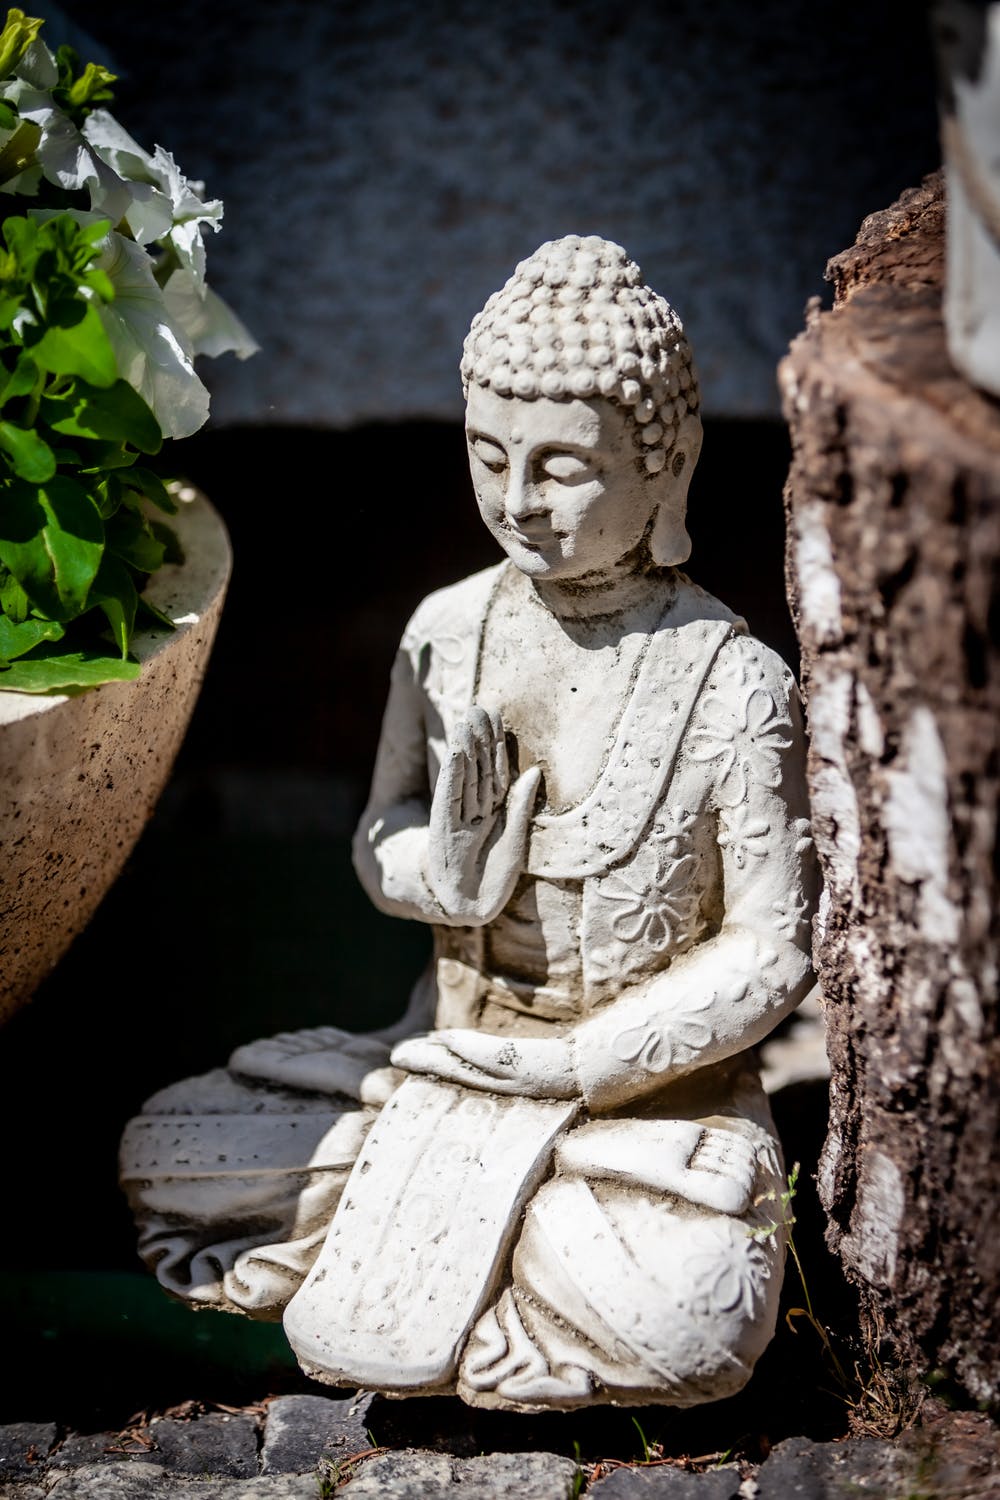 Creating Meditation Space in Your Home